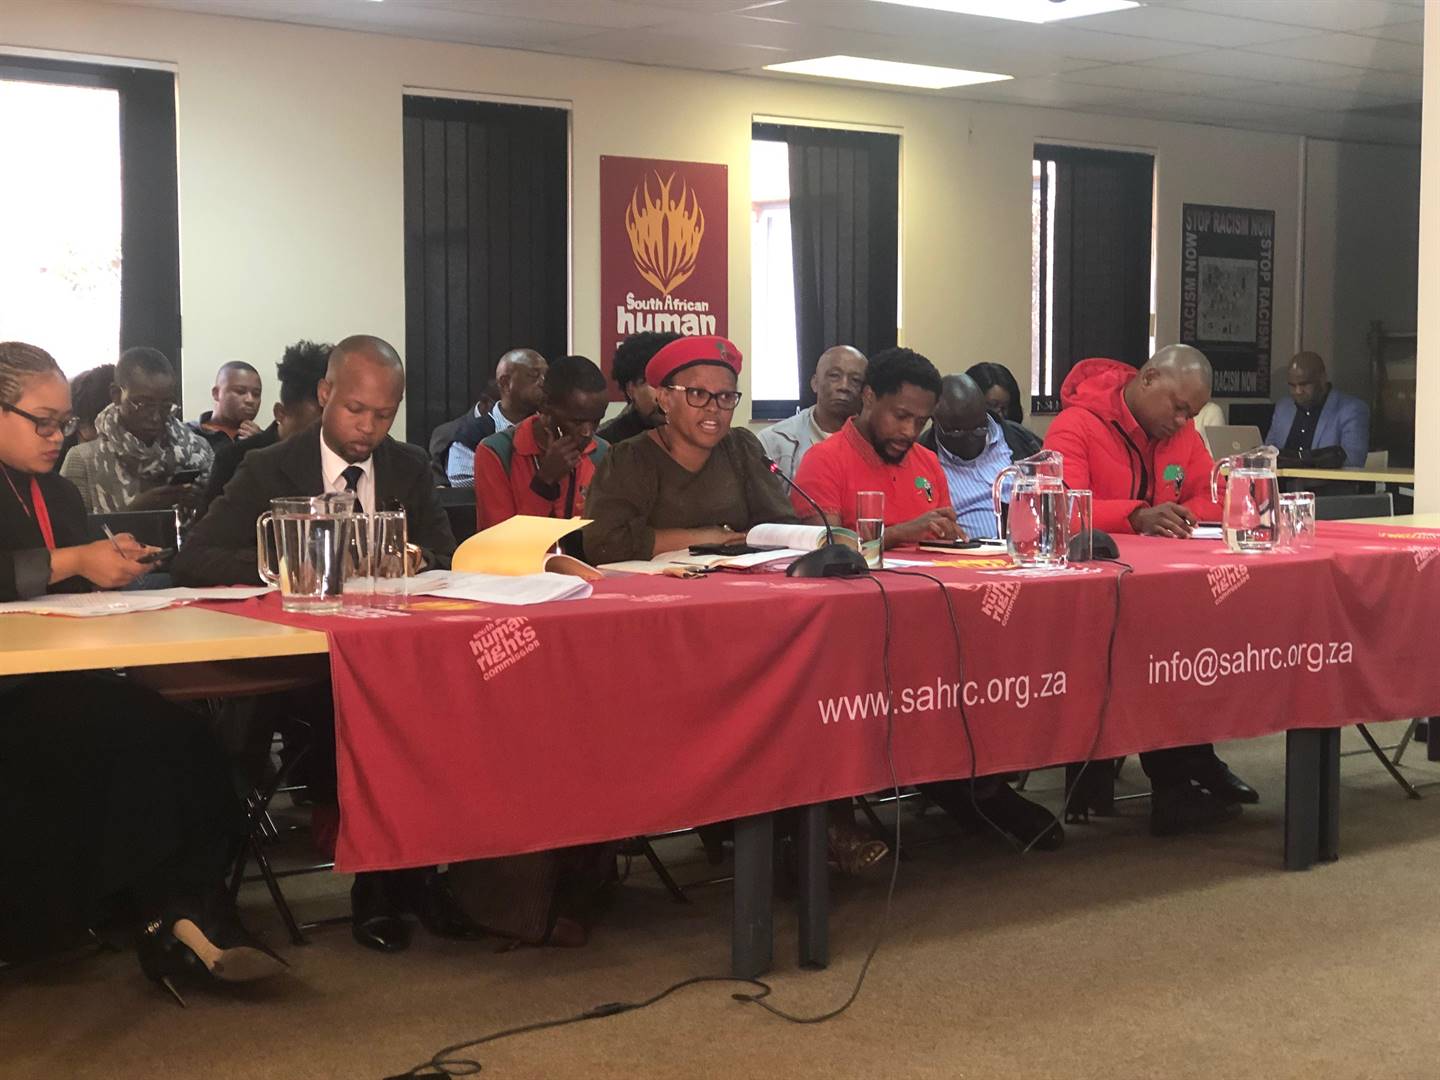 EFF Gauteng Provincial Chairpersom Mandisa Mashego accompanied by EFF national spokesperson Mbuyiseni Ndlozi giving testimony before the SA Human Rights Commission’s inquiry is to Alexandra. Picture: Palesa Dlamini